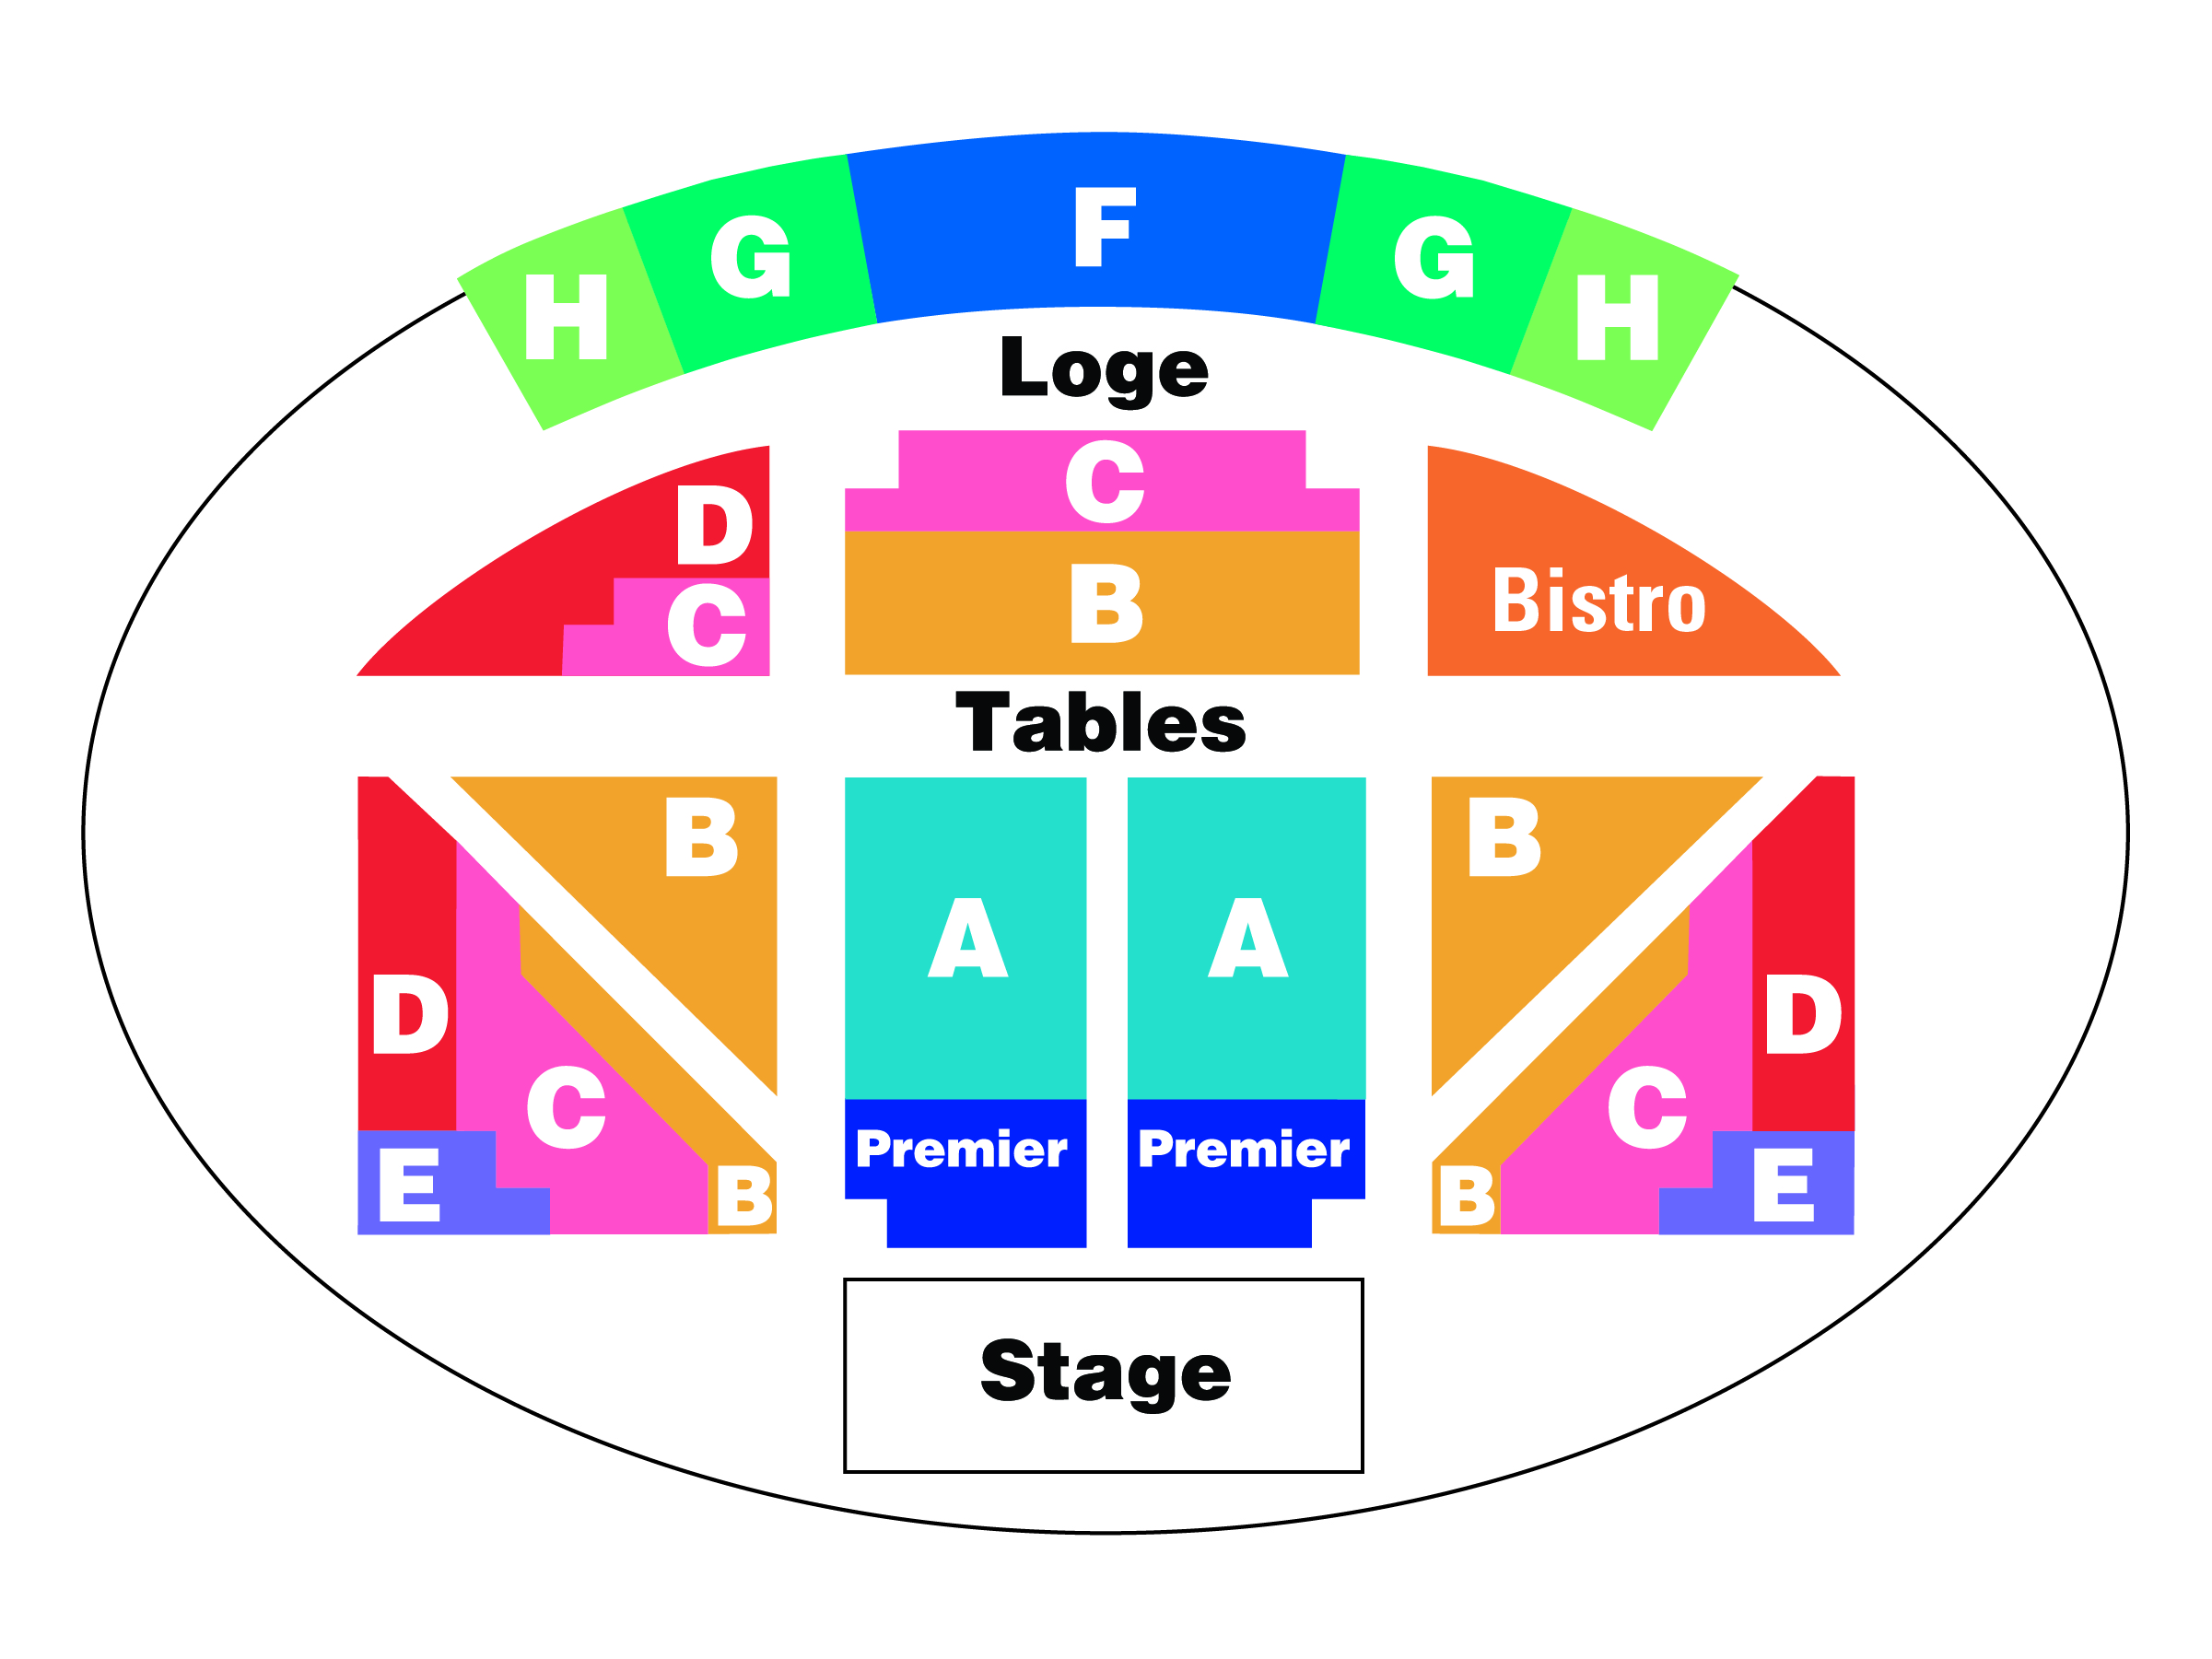 Long Beach Convention Center Arena Seating Chart